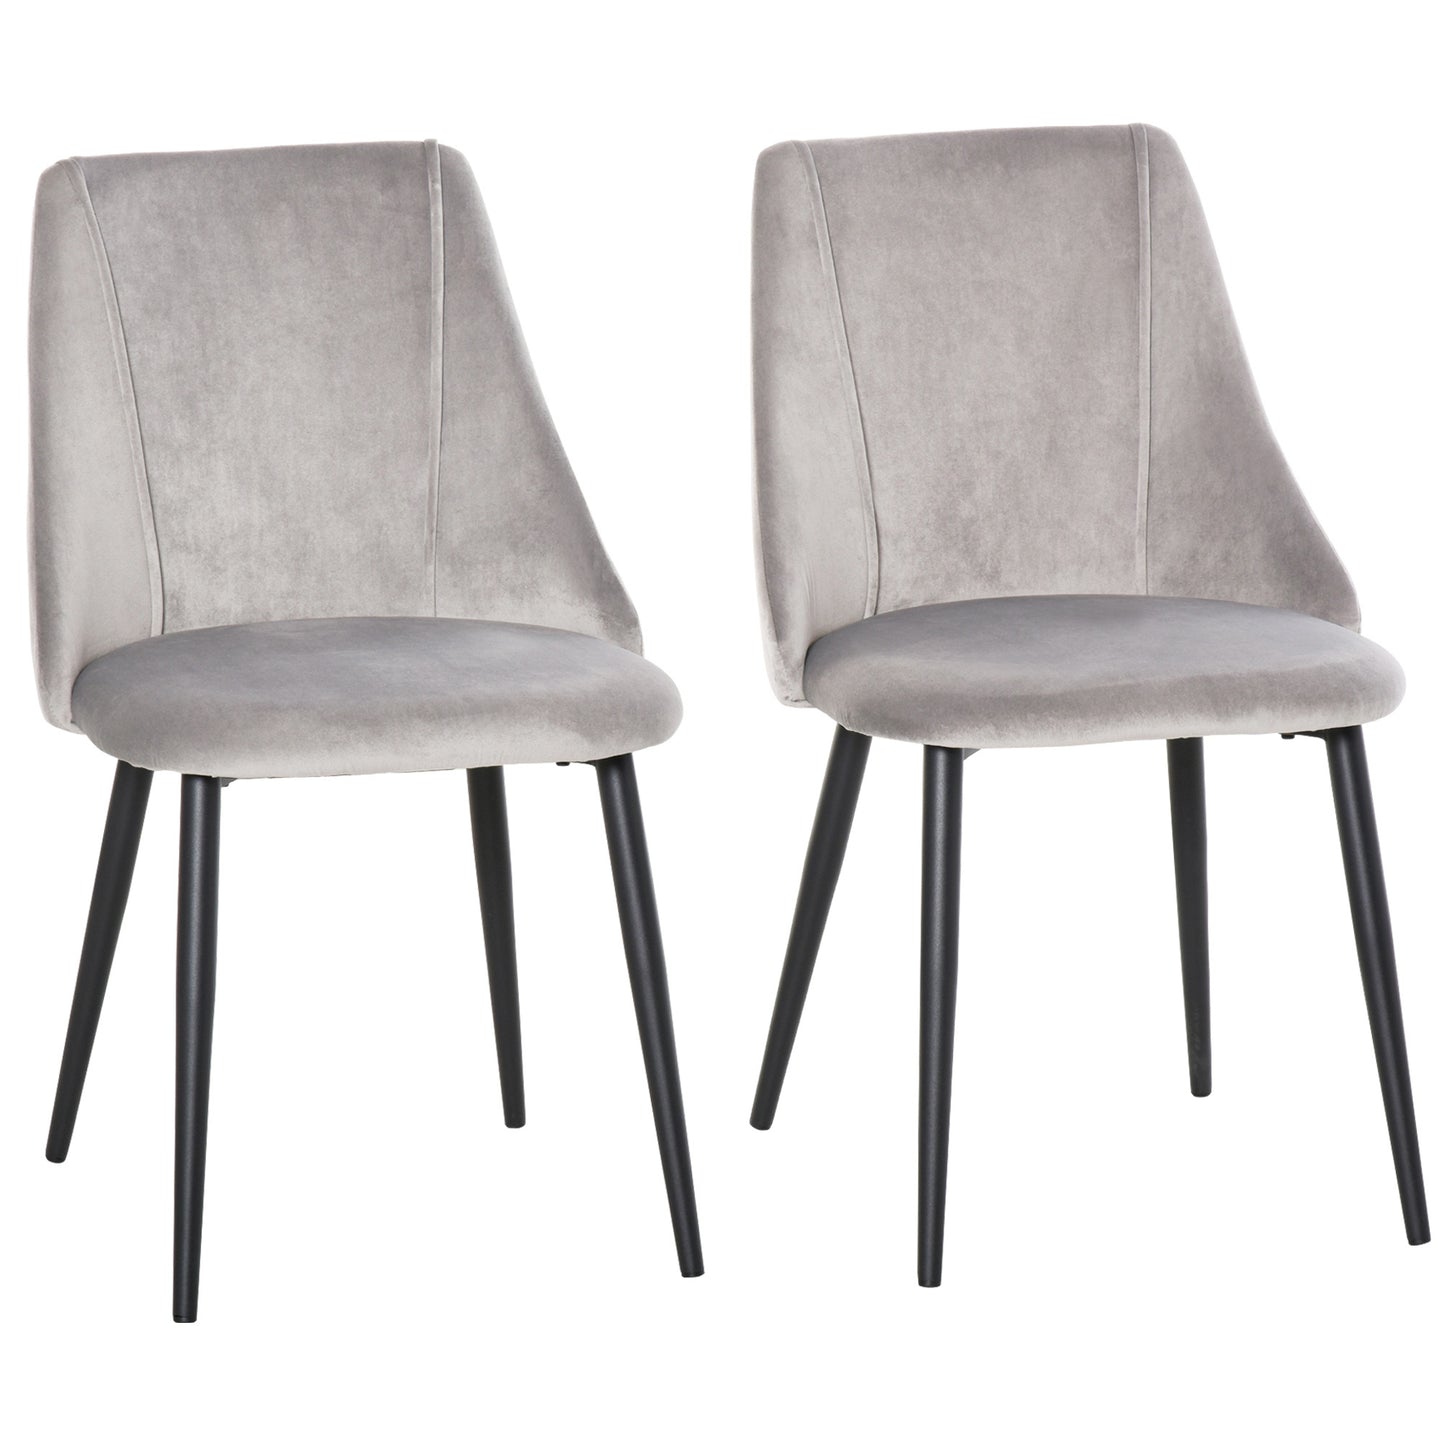 HOMCOM High Back Dining Chairs Modern Upholstered Velvet-Touch Accent Chairs